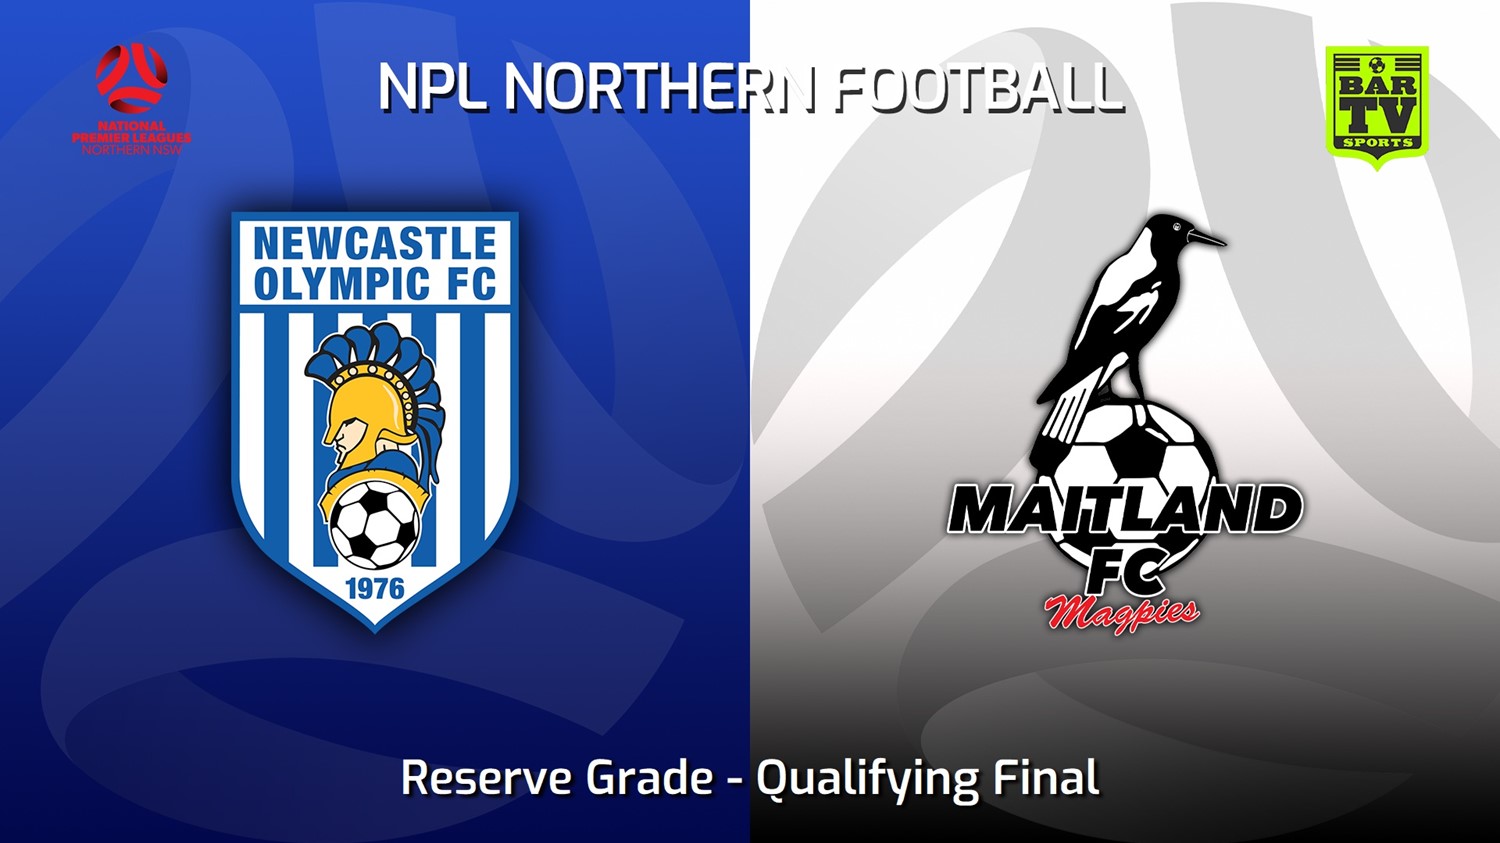 230820-NNSW NPLM Res Qualifying Final - Newcastle Olympic Res v Maitland FC Res Minigame Slate Image